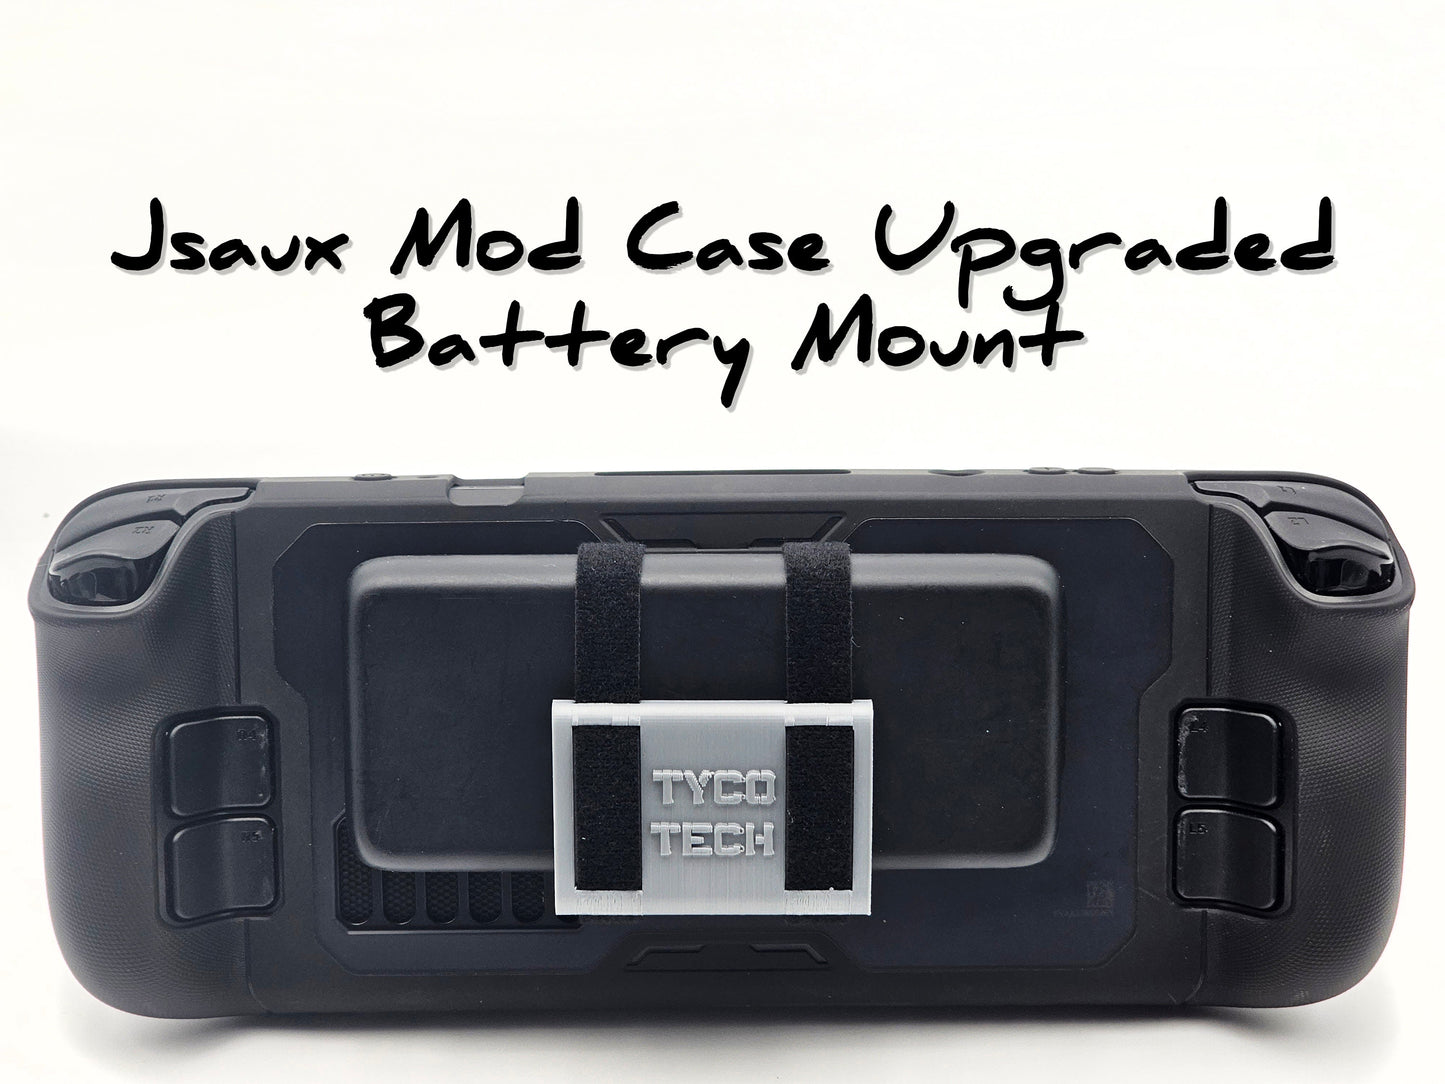 Steam Deck Jsaux ModCase Battery Mount - WAY More Secure Than The Stock Battery Holder